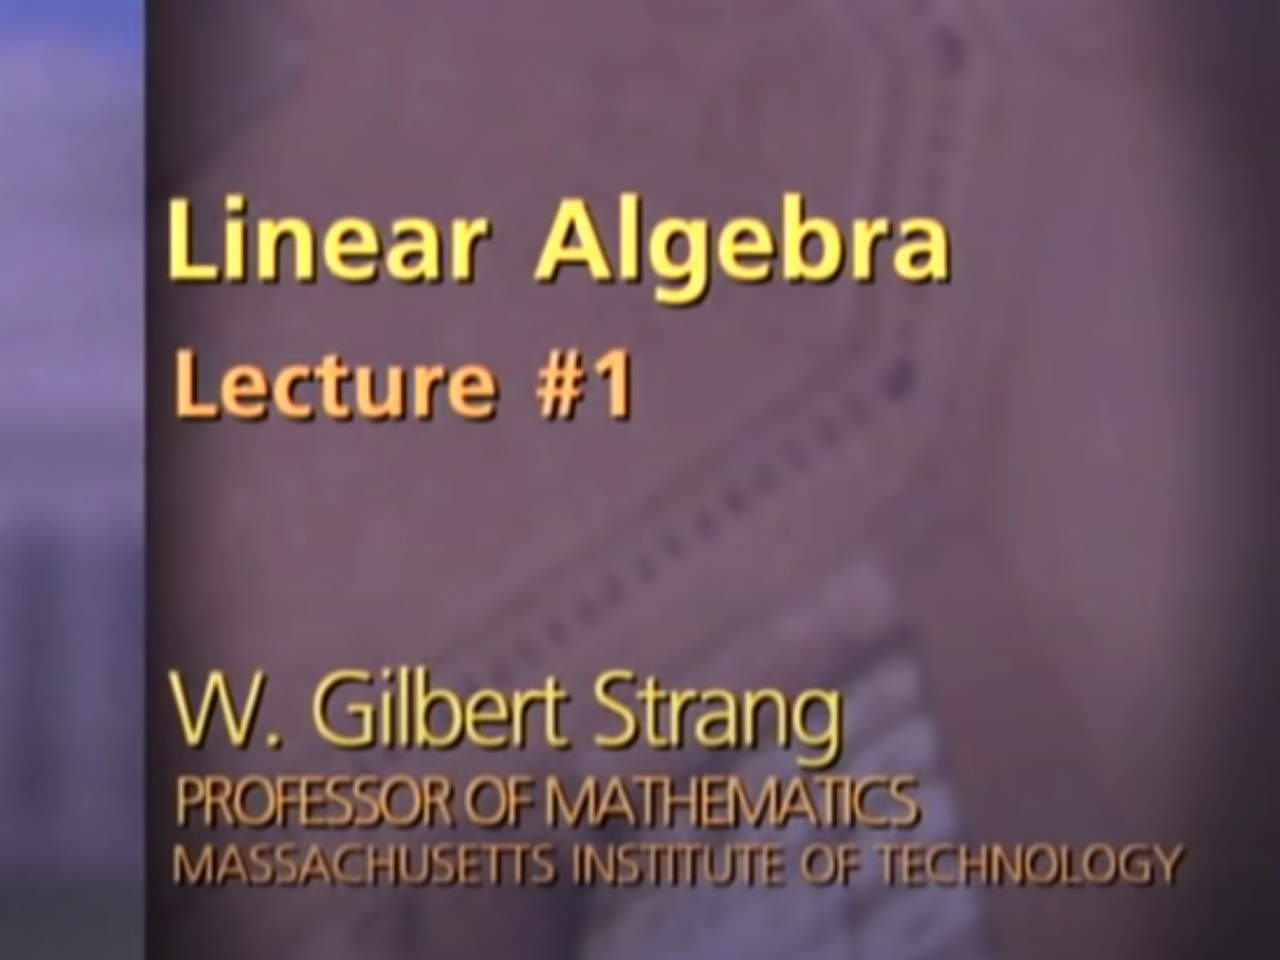 Gilbert Strang lectures on Linear Algebra (MIT)